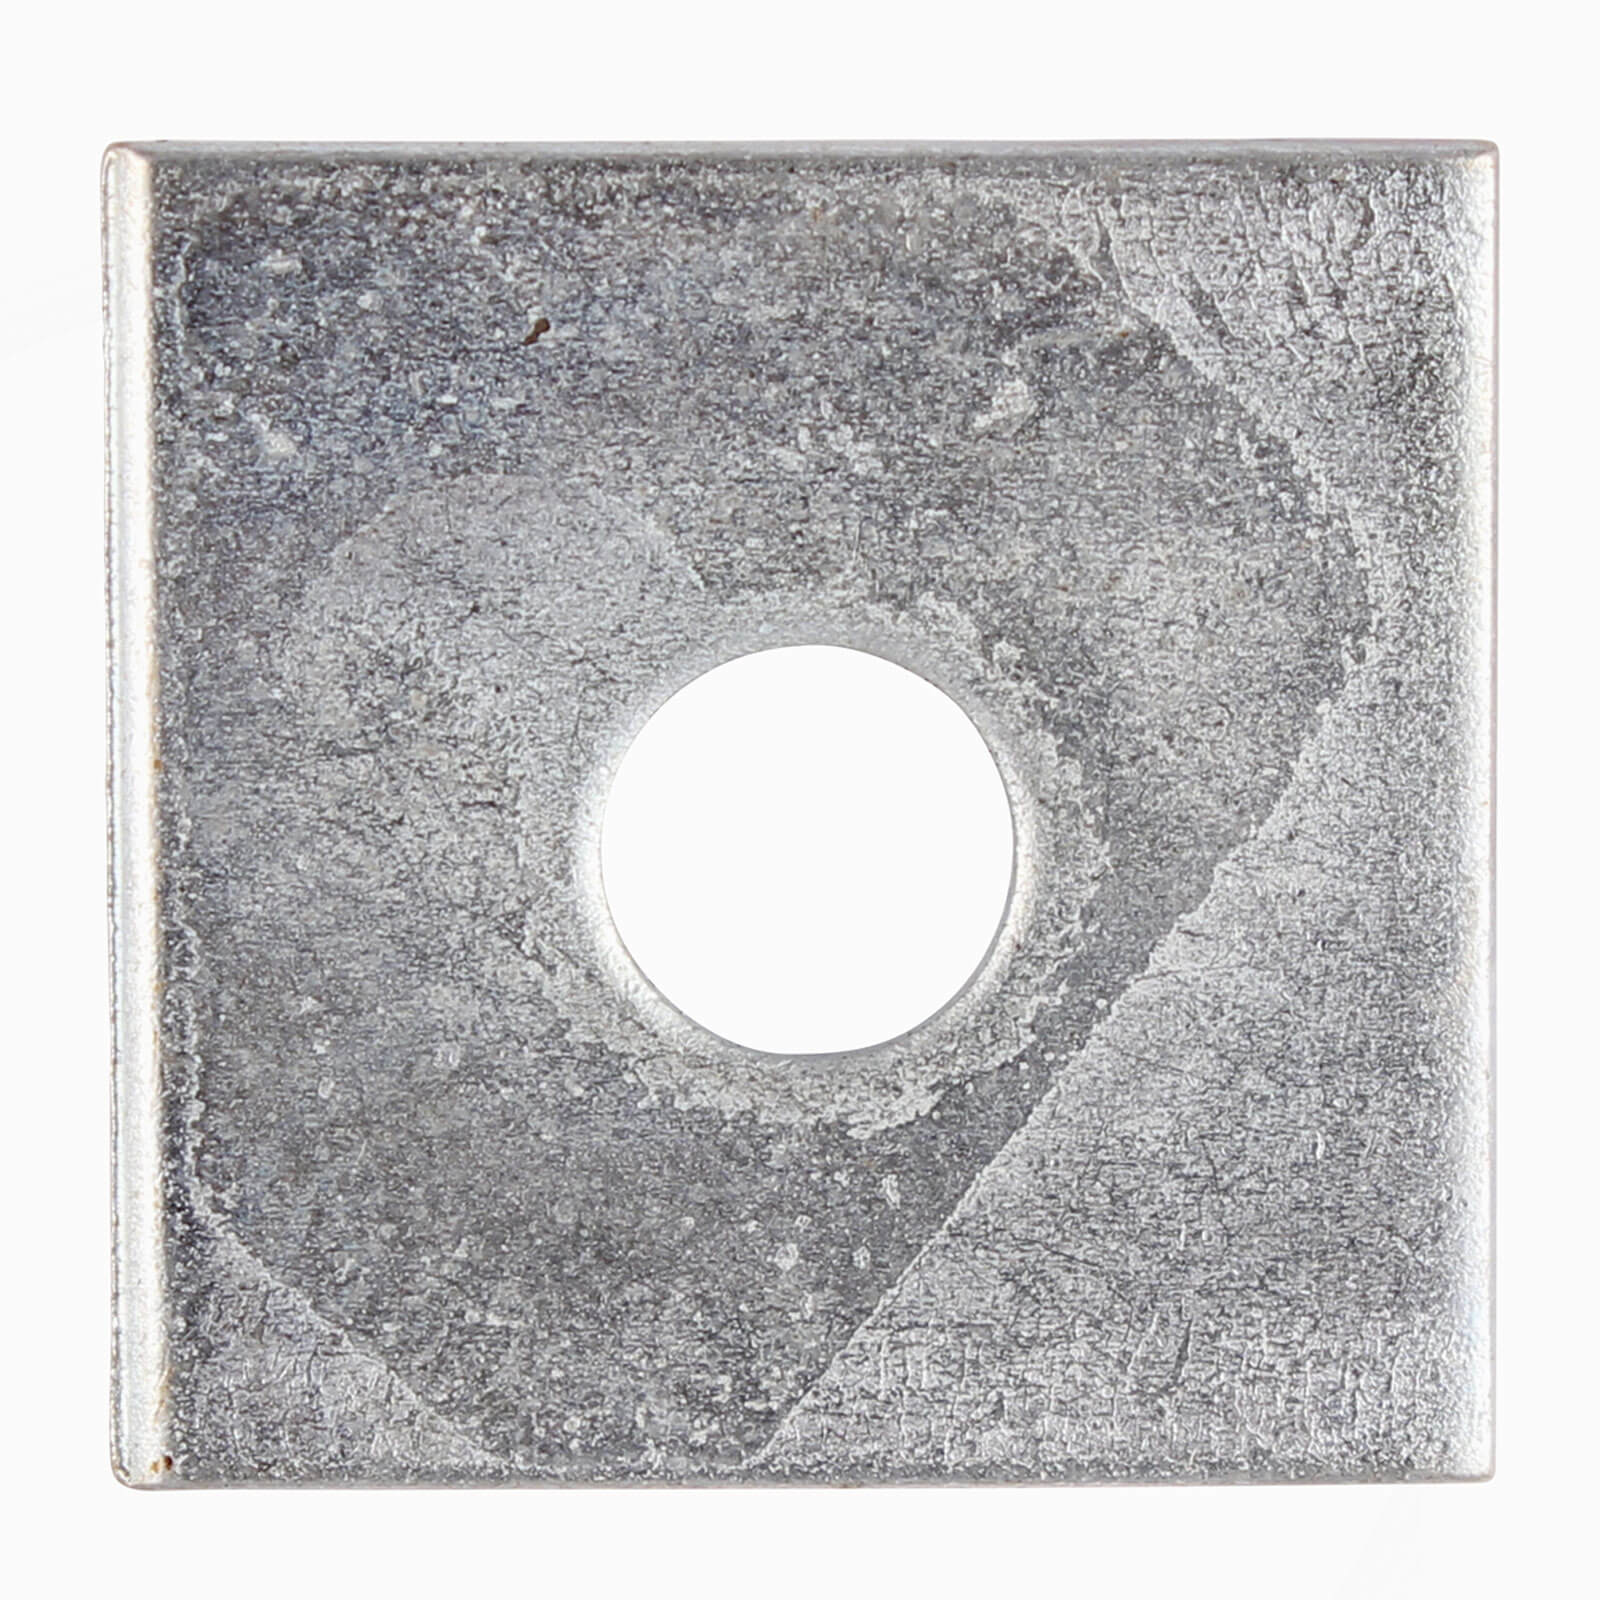 Photos - Nail / Screw / Fastener TIMCO Square Plate Washer Zinc Plated 10mm 50mm Pack of 2 1050WHSPZP 